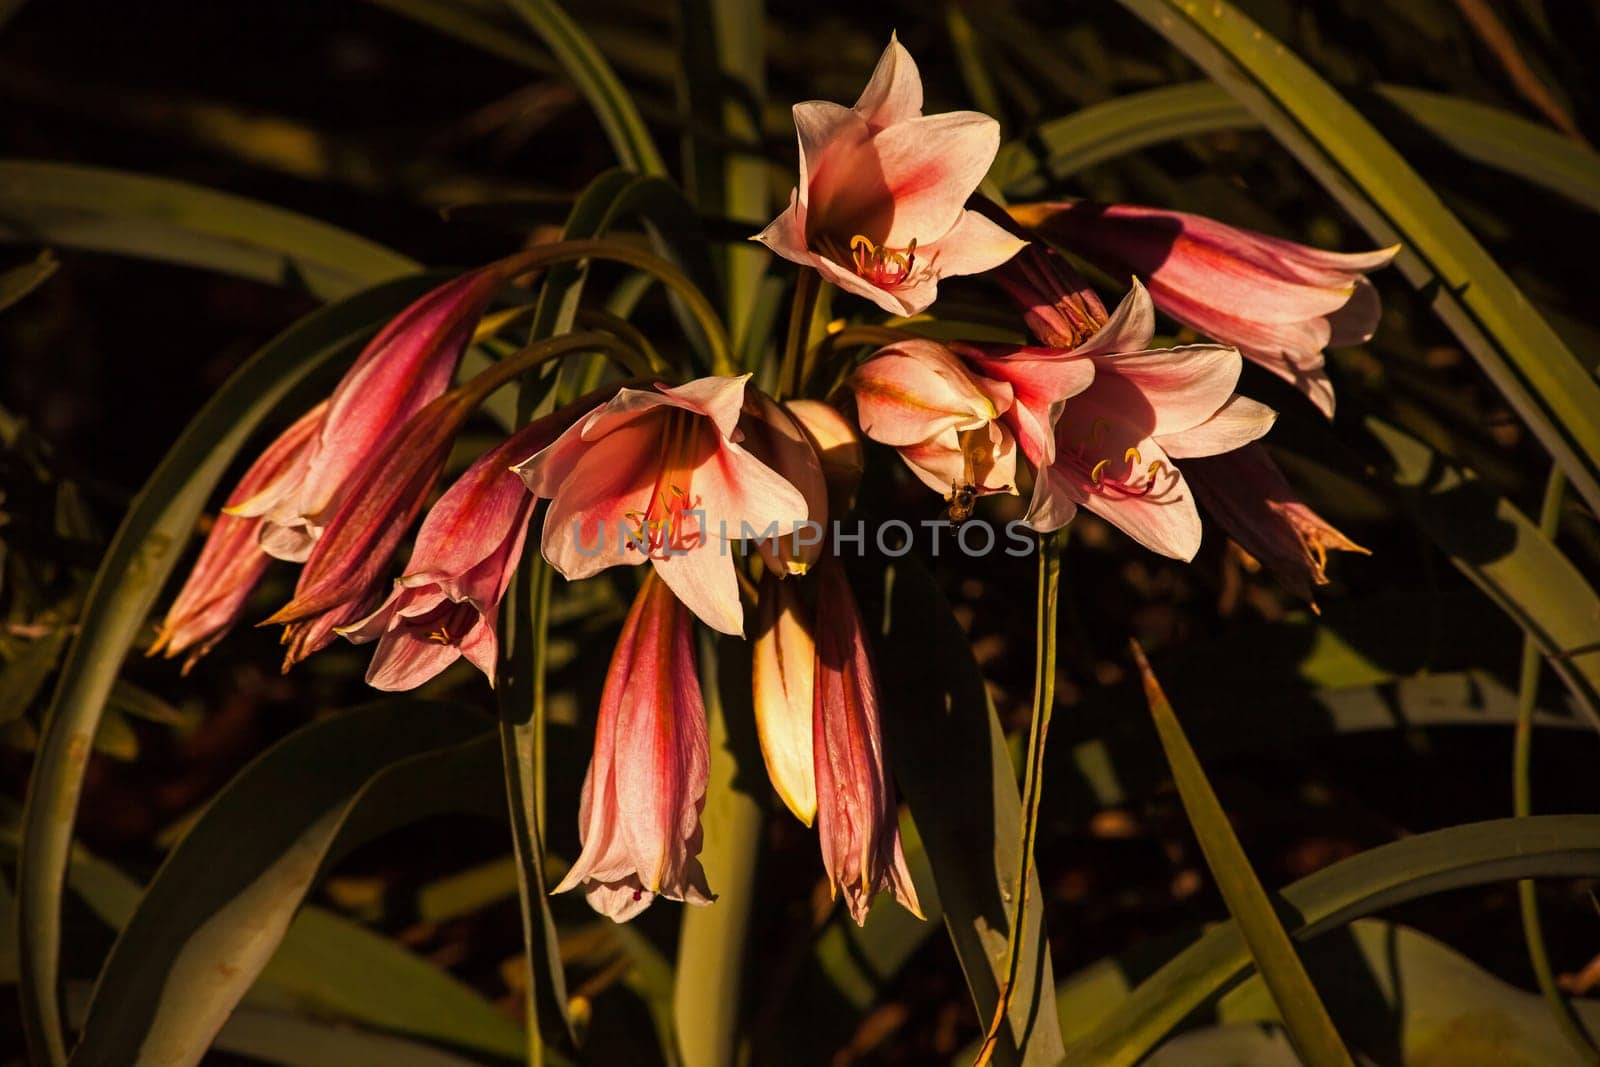 The Orange River lily, also known as the Vaal River lily, (Crinum bulbispermum) naturally occur on the floodplains of rivers in the highveld region of South Africa